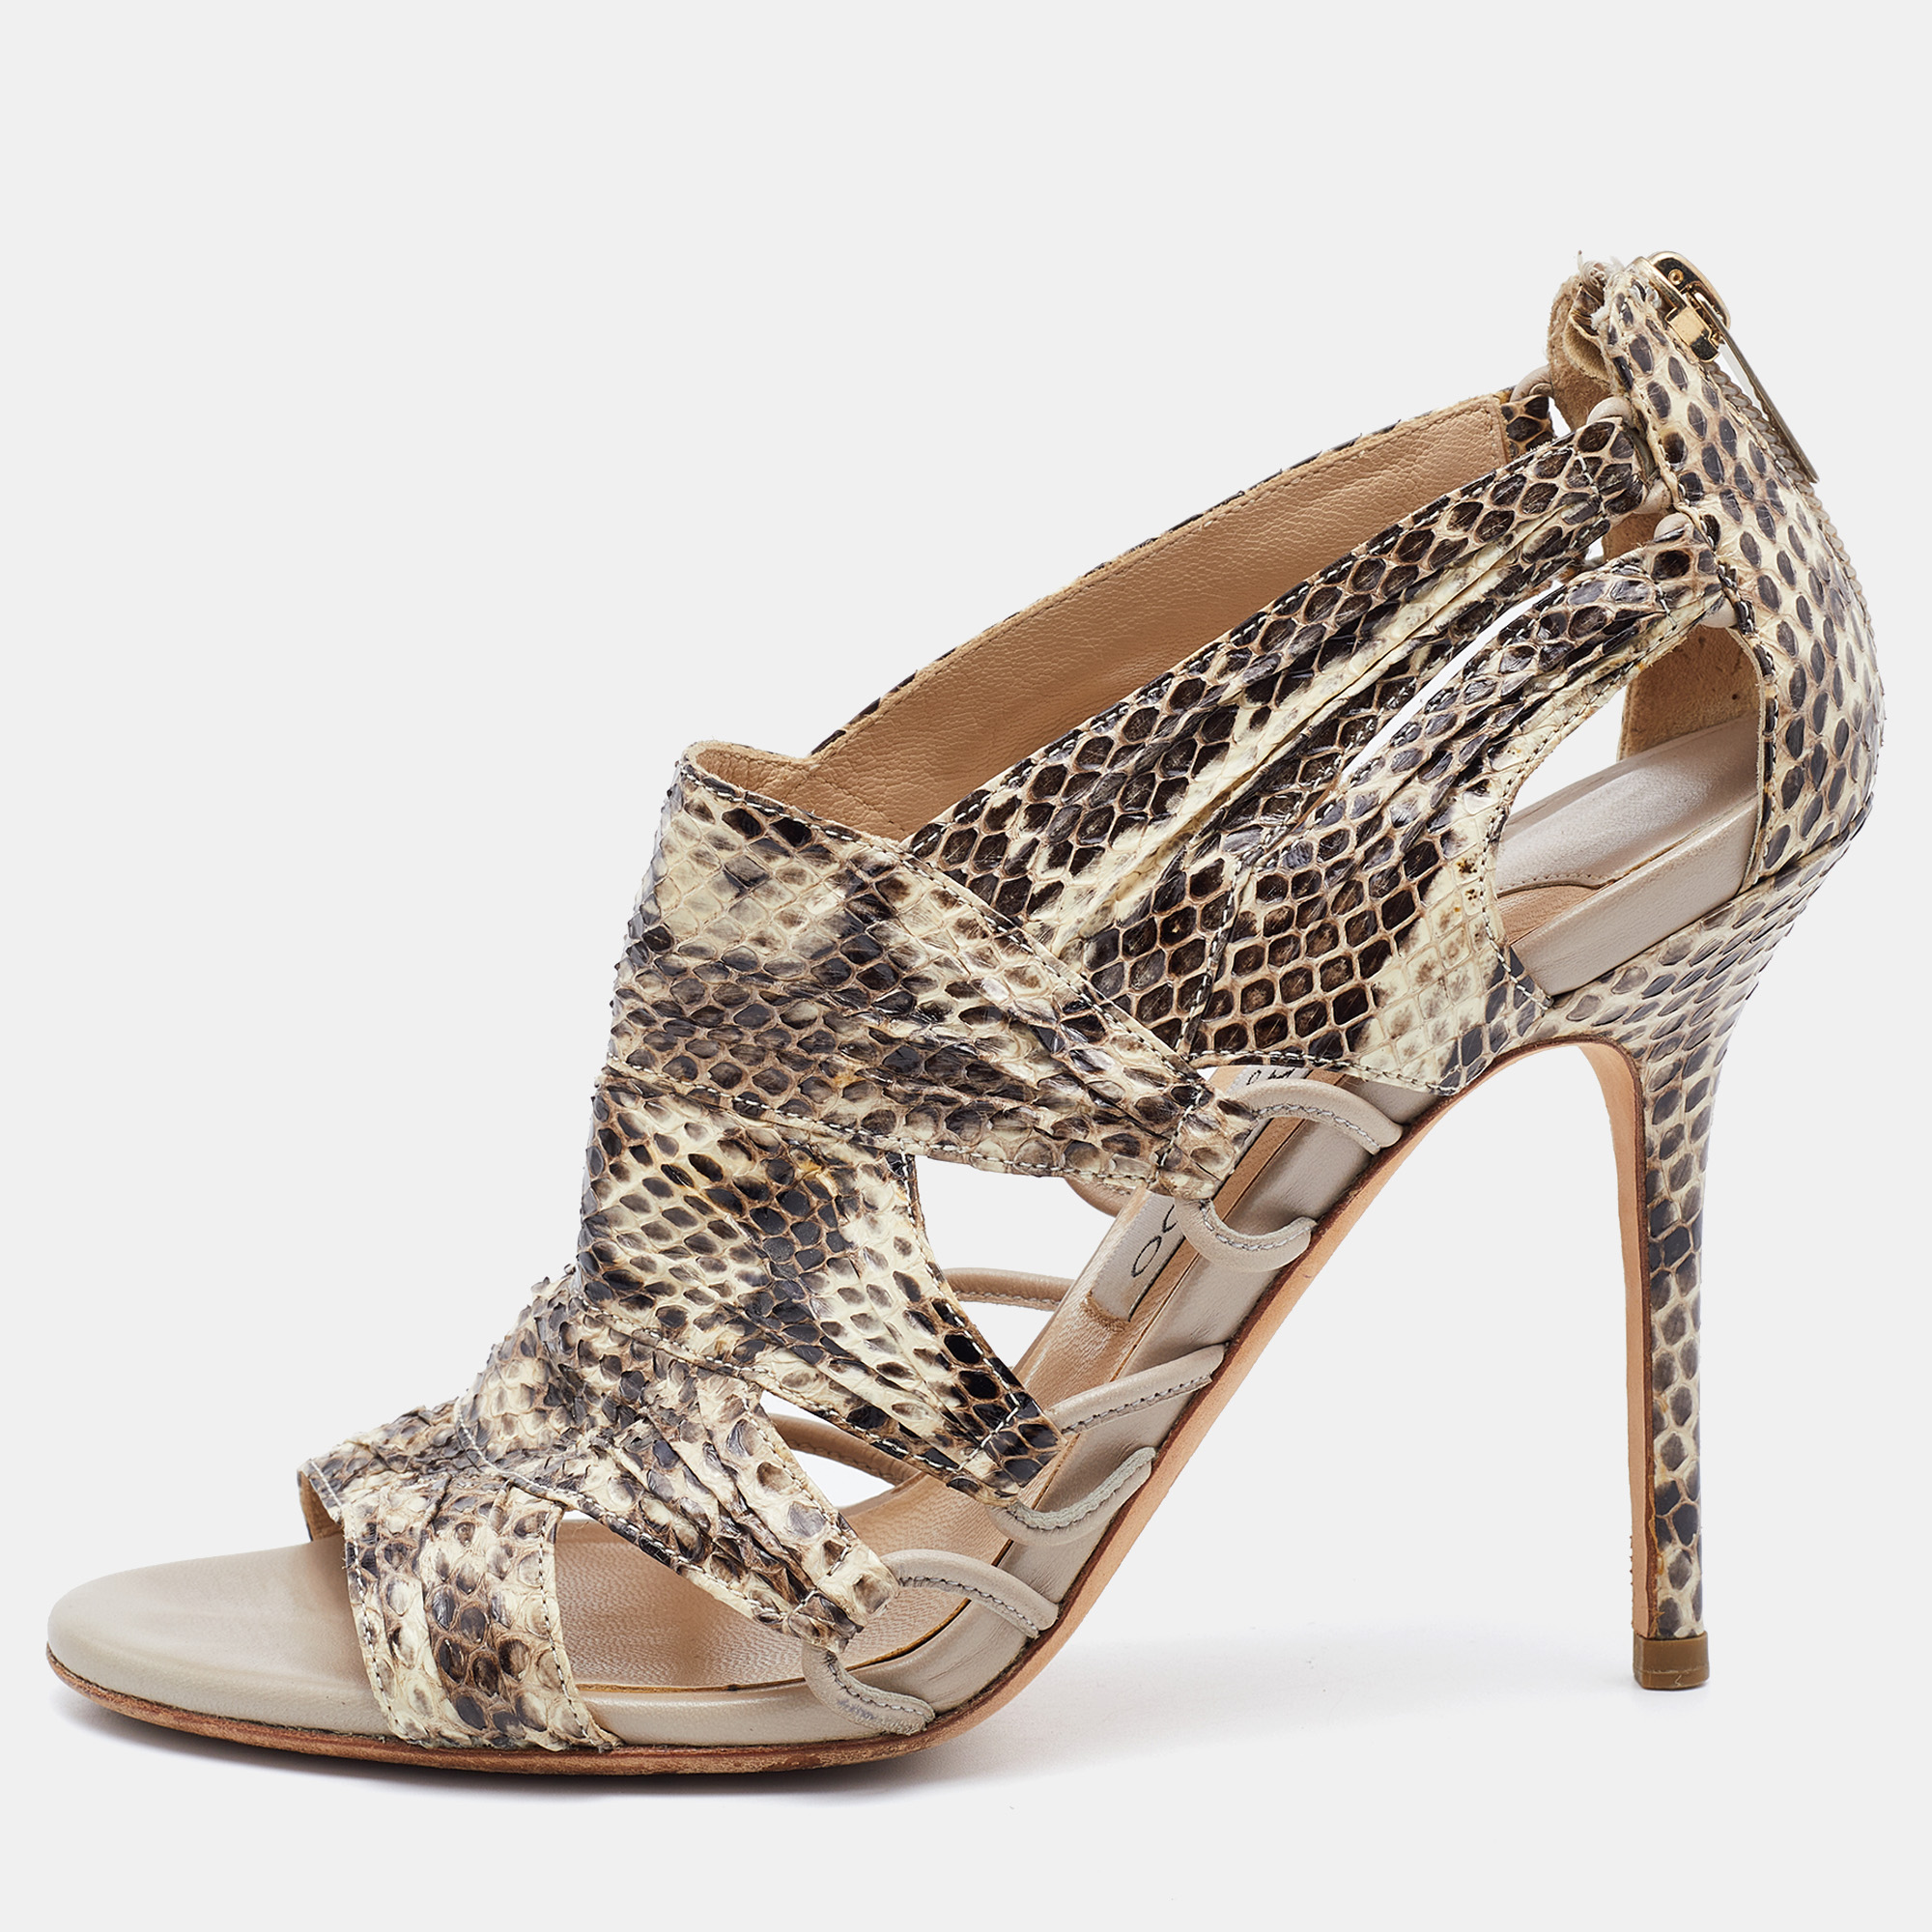 Pre-owned Jimmy Choo Beige/brown Python Leather Open Toe Pumps Size 38